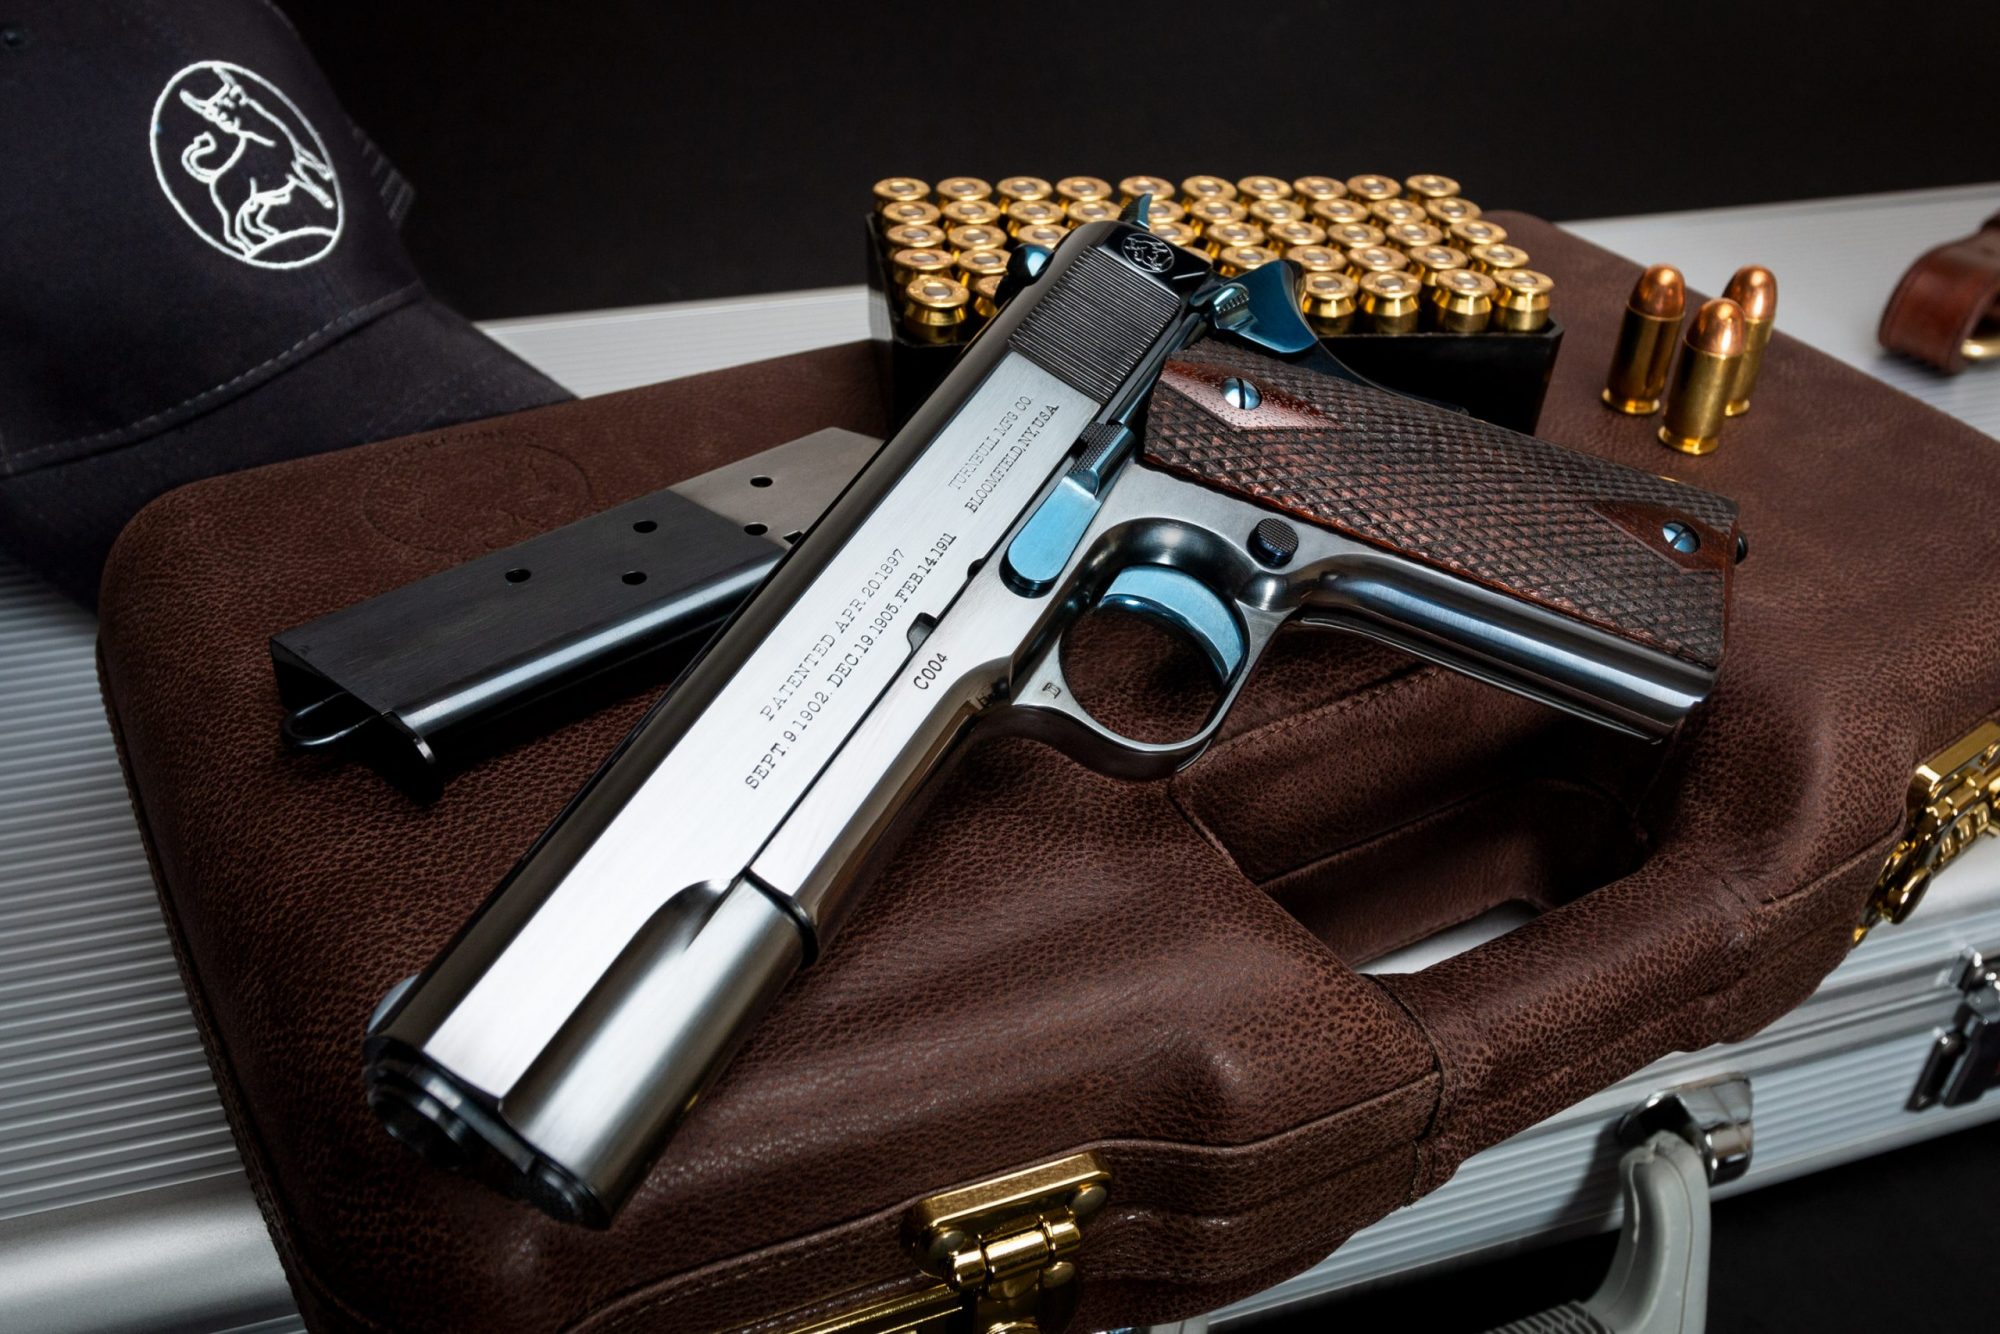 Photo of a new, Turnbull-manufactured Commercial Model 1911 featuring period-correct charcoal bluing and nitre bluing